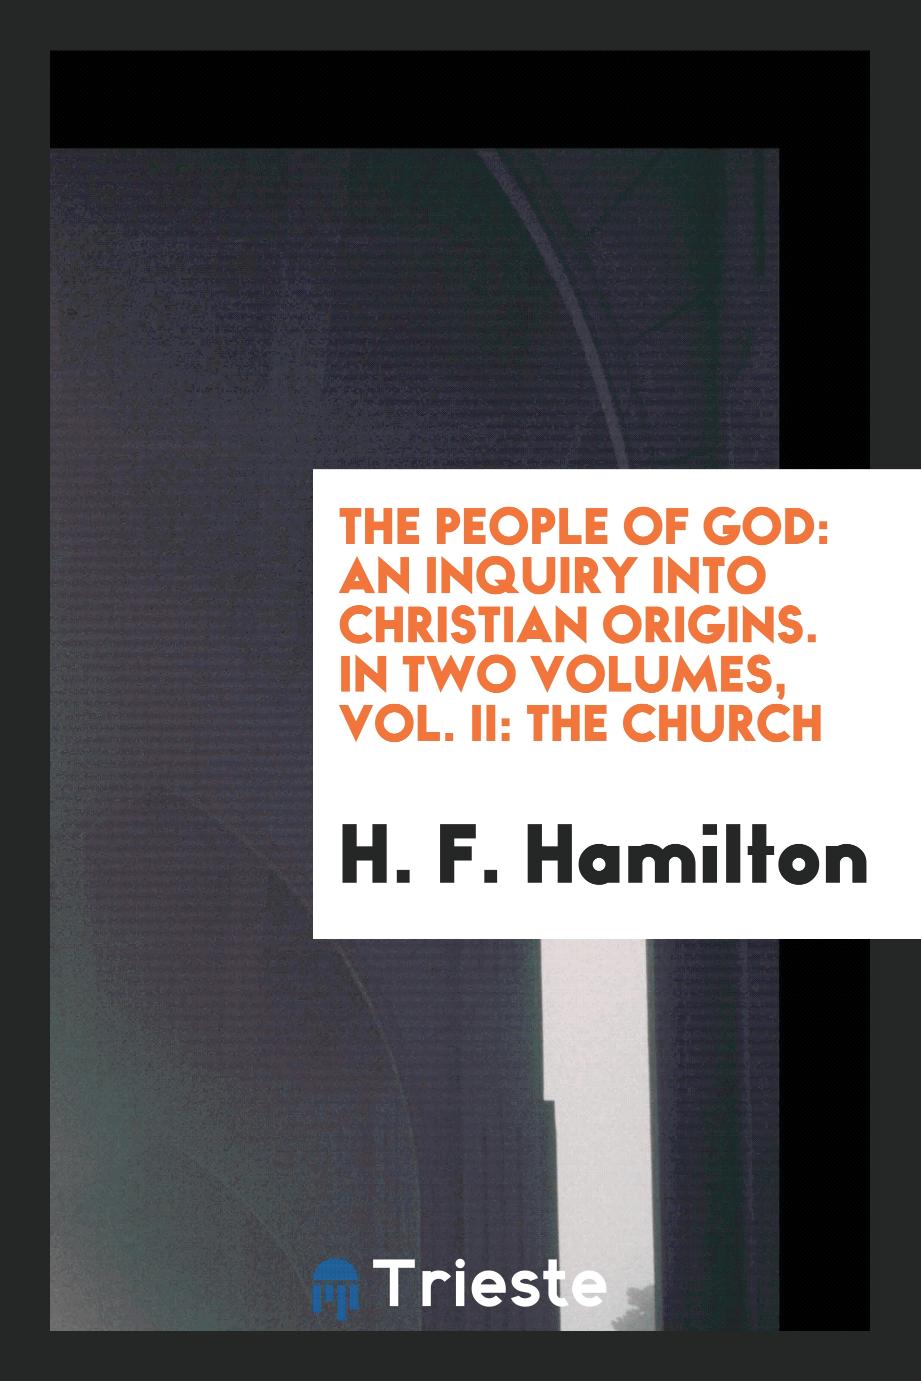 The People of God: An Inquiry into Christian Origins. In Two Volumes, Vol. II: The Church